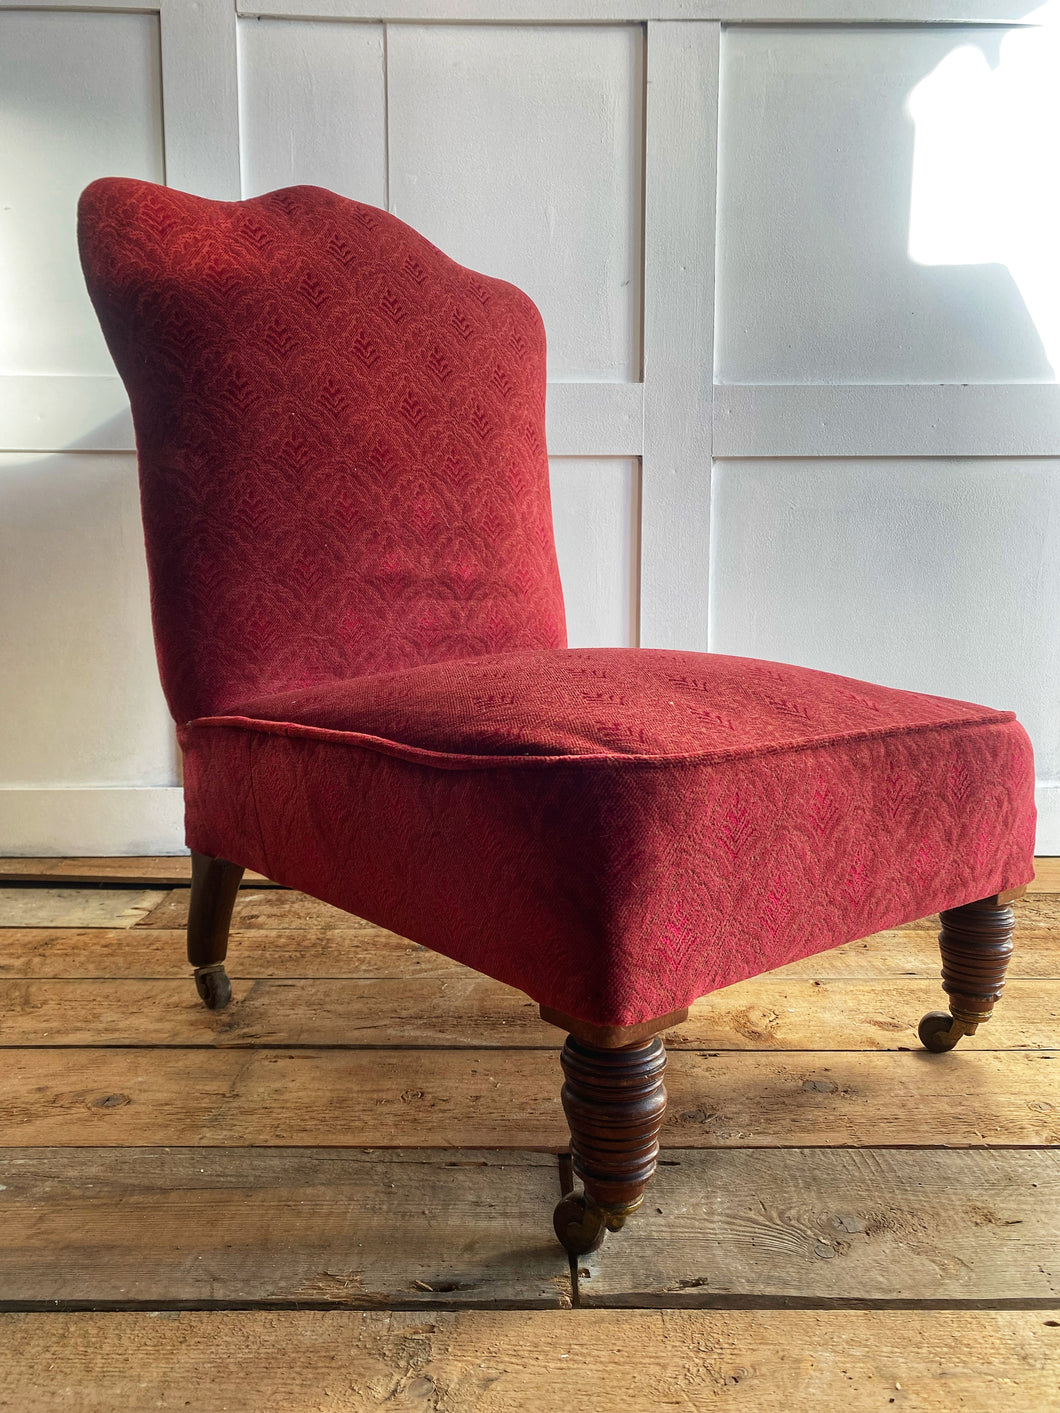 Cornelius V. Smith Victorian slipper chair reupholstered and renovated